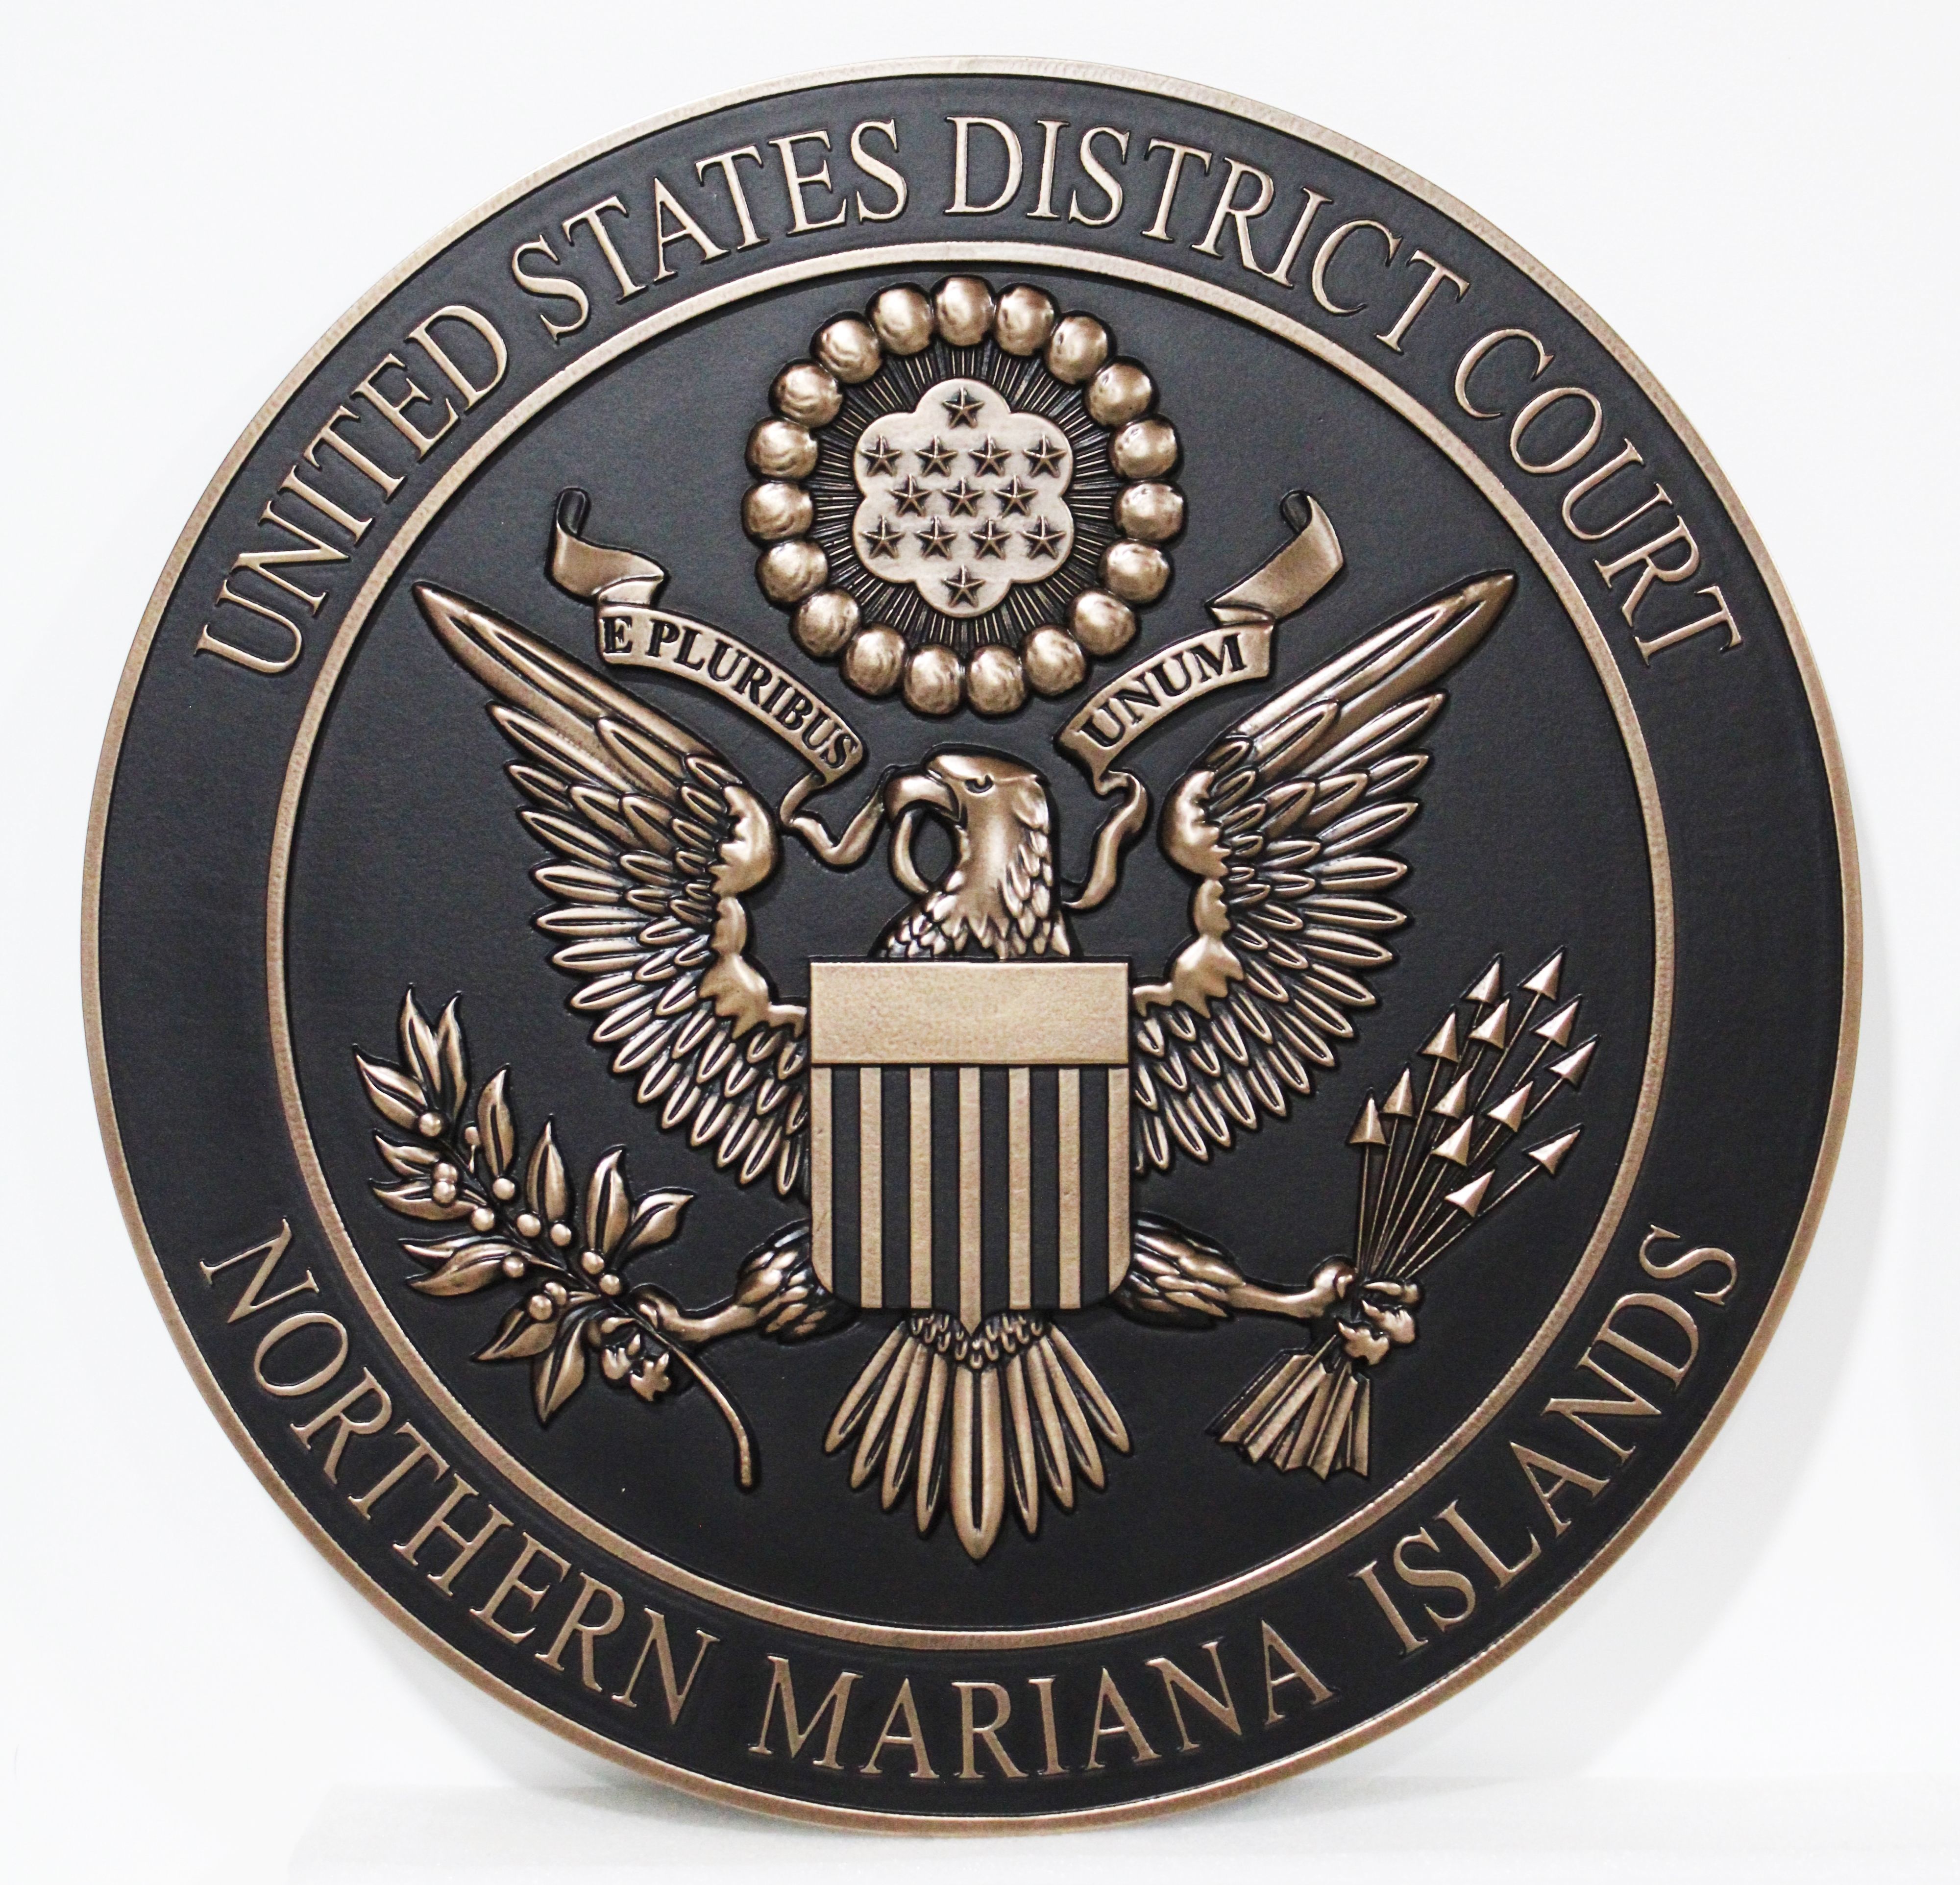 FP-1392- Carved 3-D Bronze-Plated HDU Plaque of the Seal of the United States District Court, Northern Mariana Islands